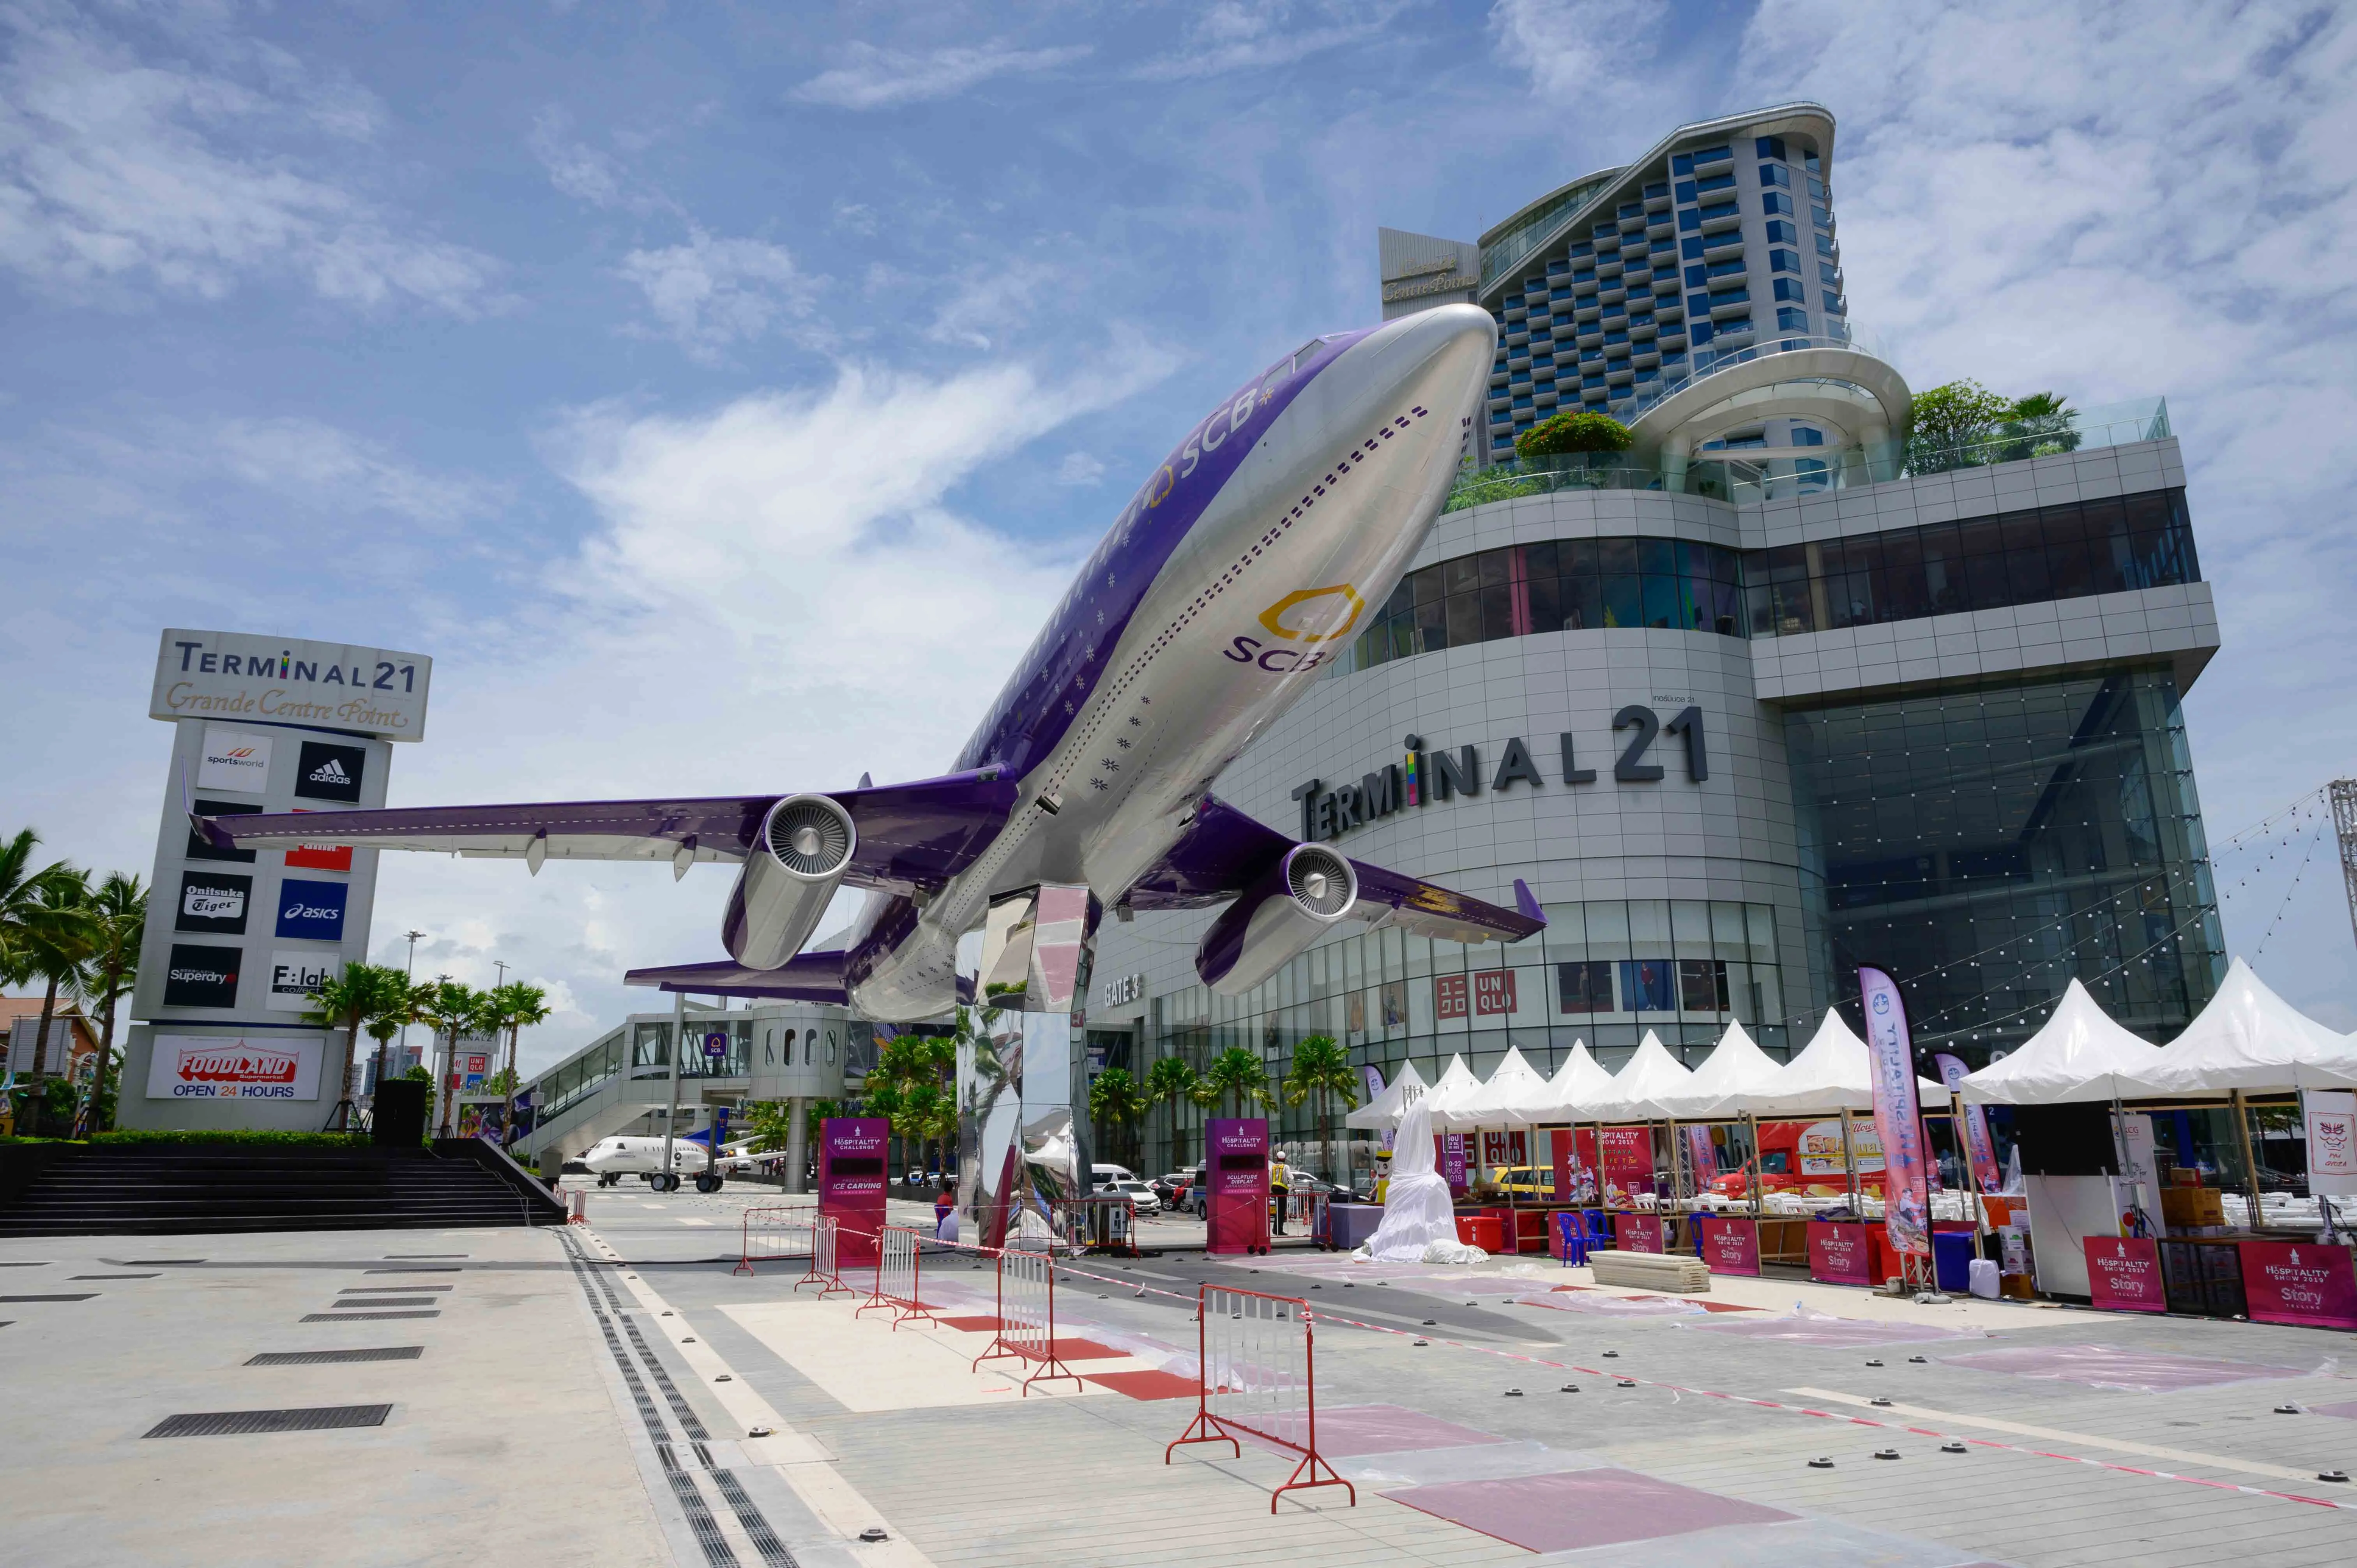 Terminal 21 Pattaya in Thailand, central_asia | Accessories,Clothes,Other Crafts,Watches,Swimwear - Rated 4.6